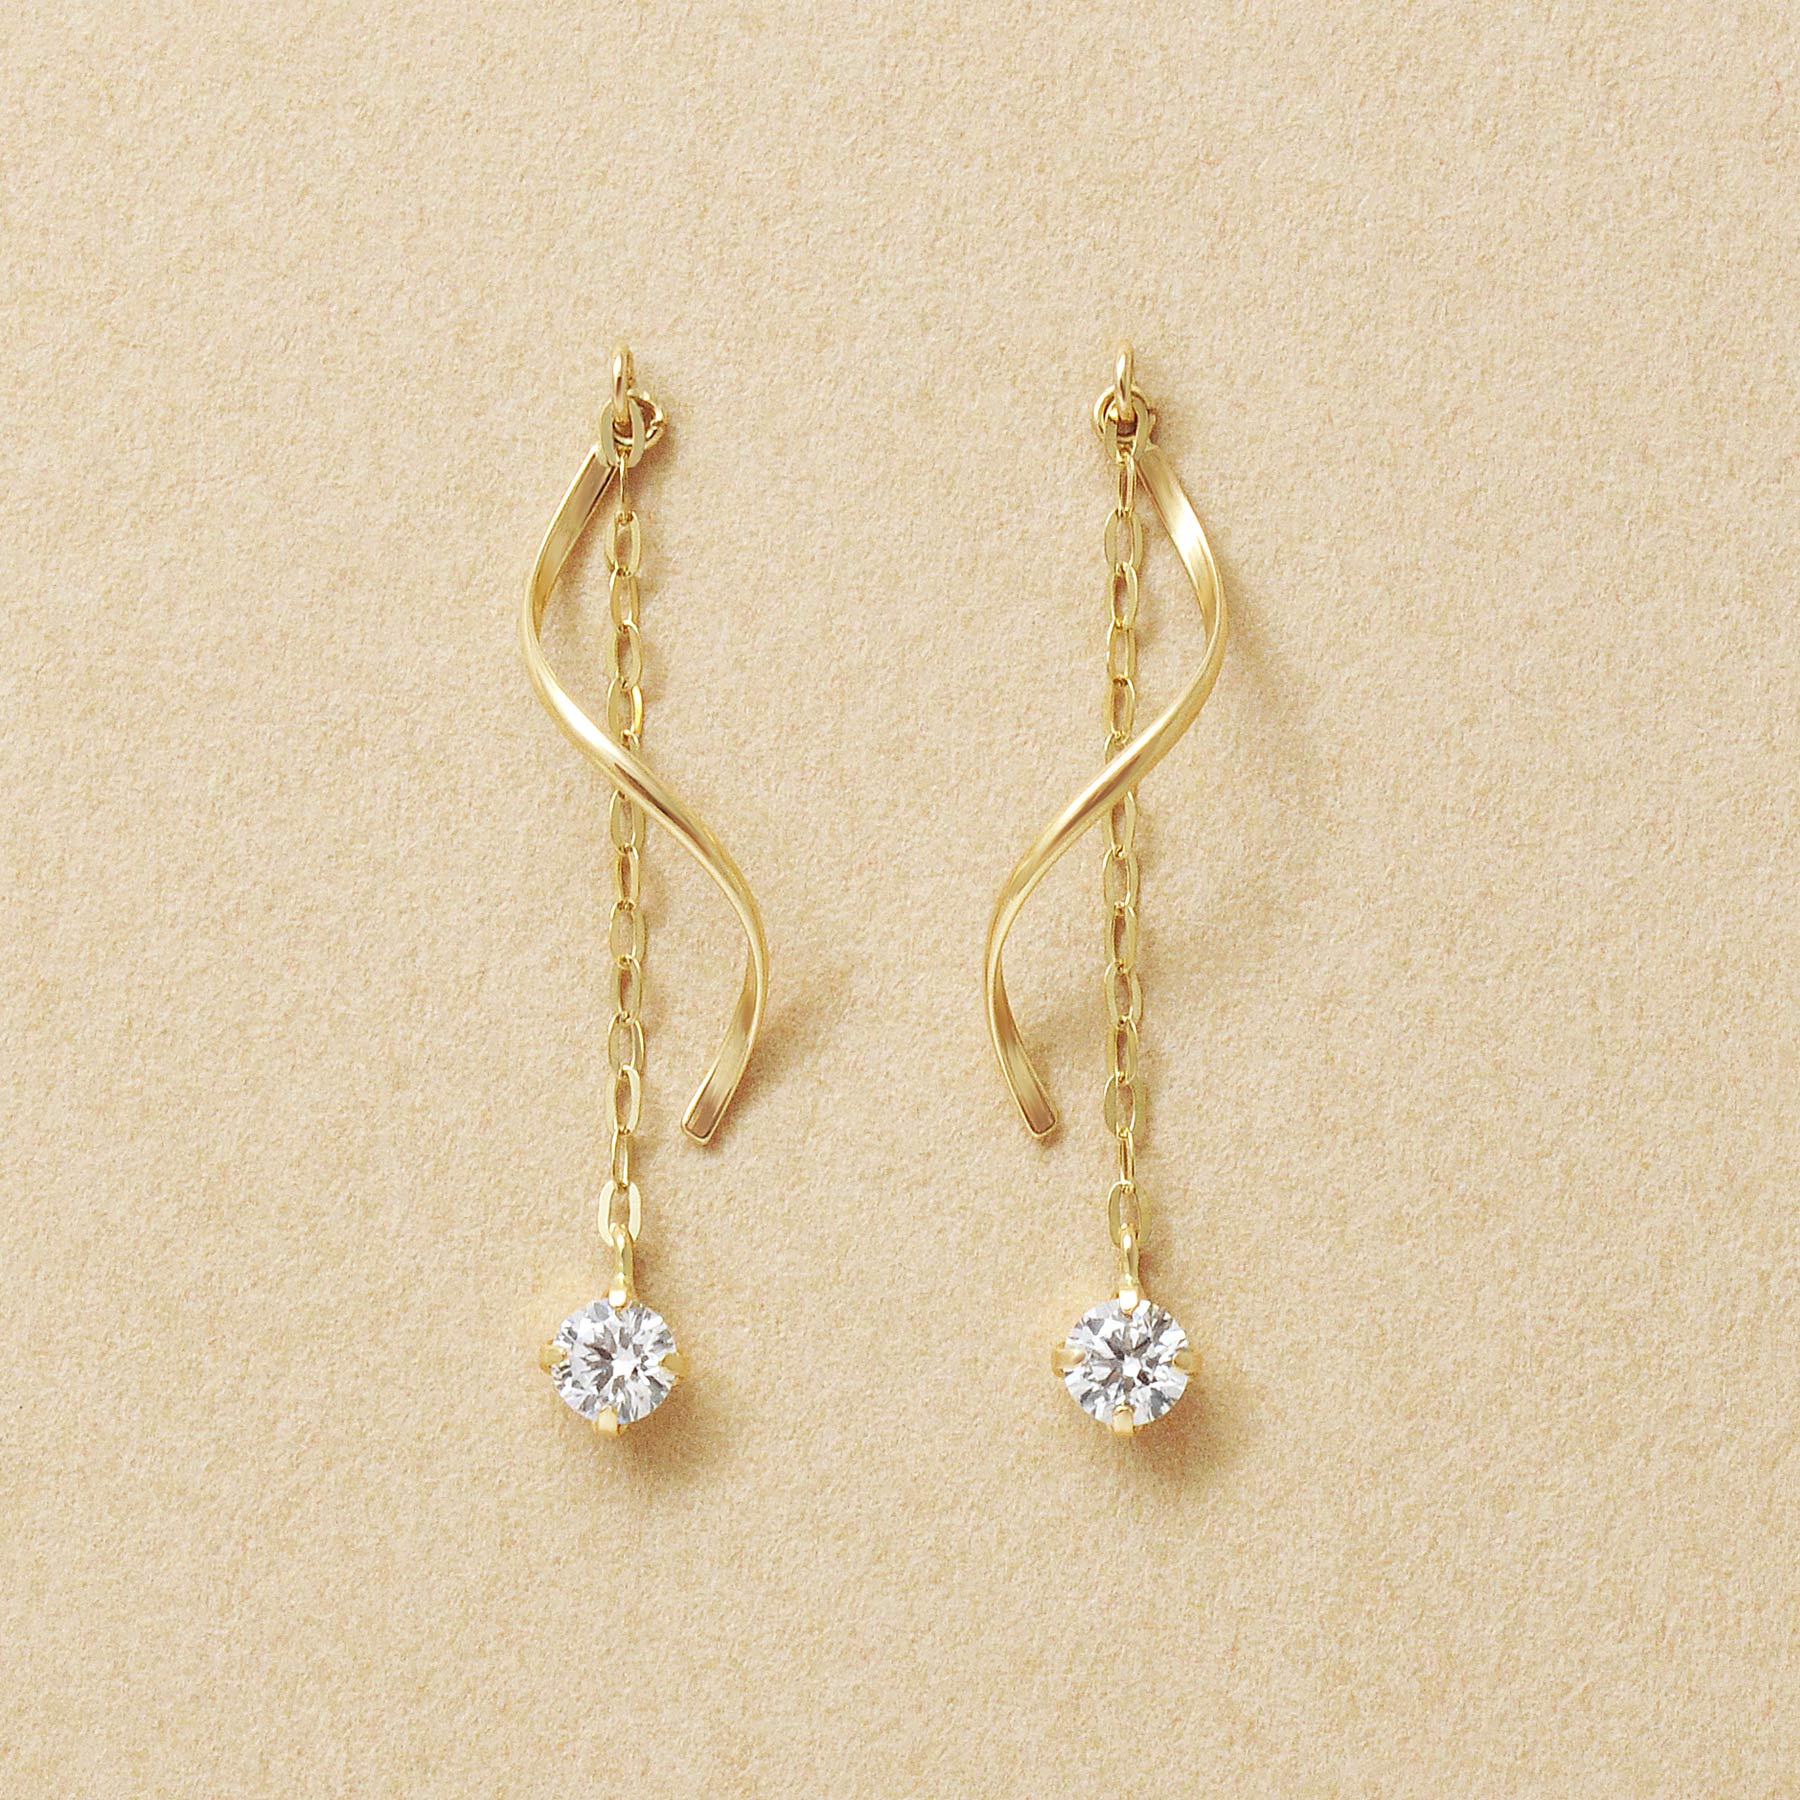 10K Glittering Twisted Dangle Earrings (Yellow Gold) - Product Image